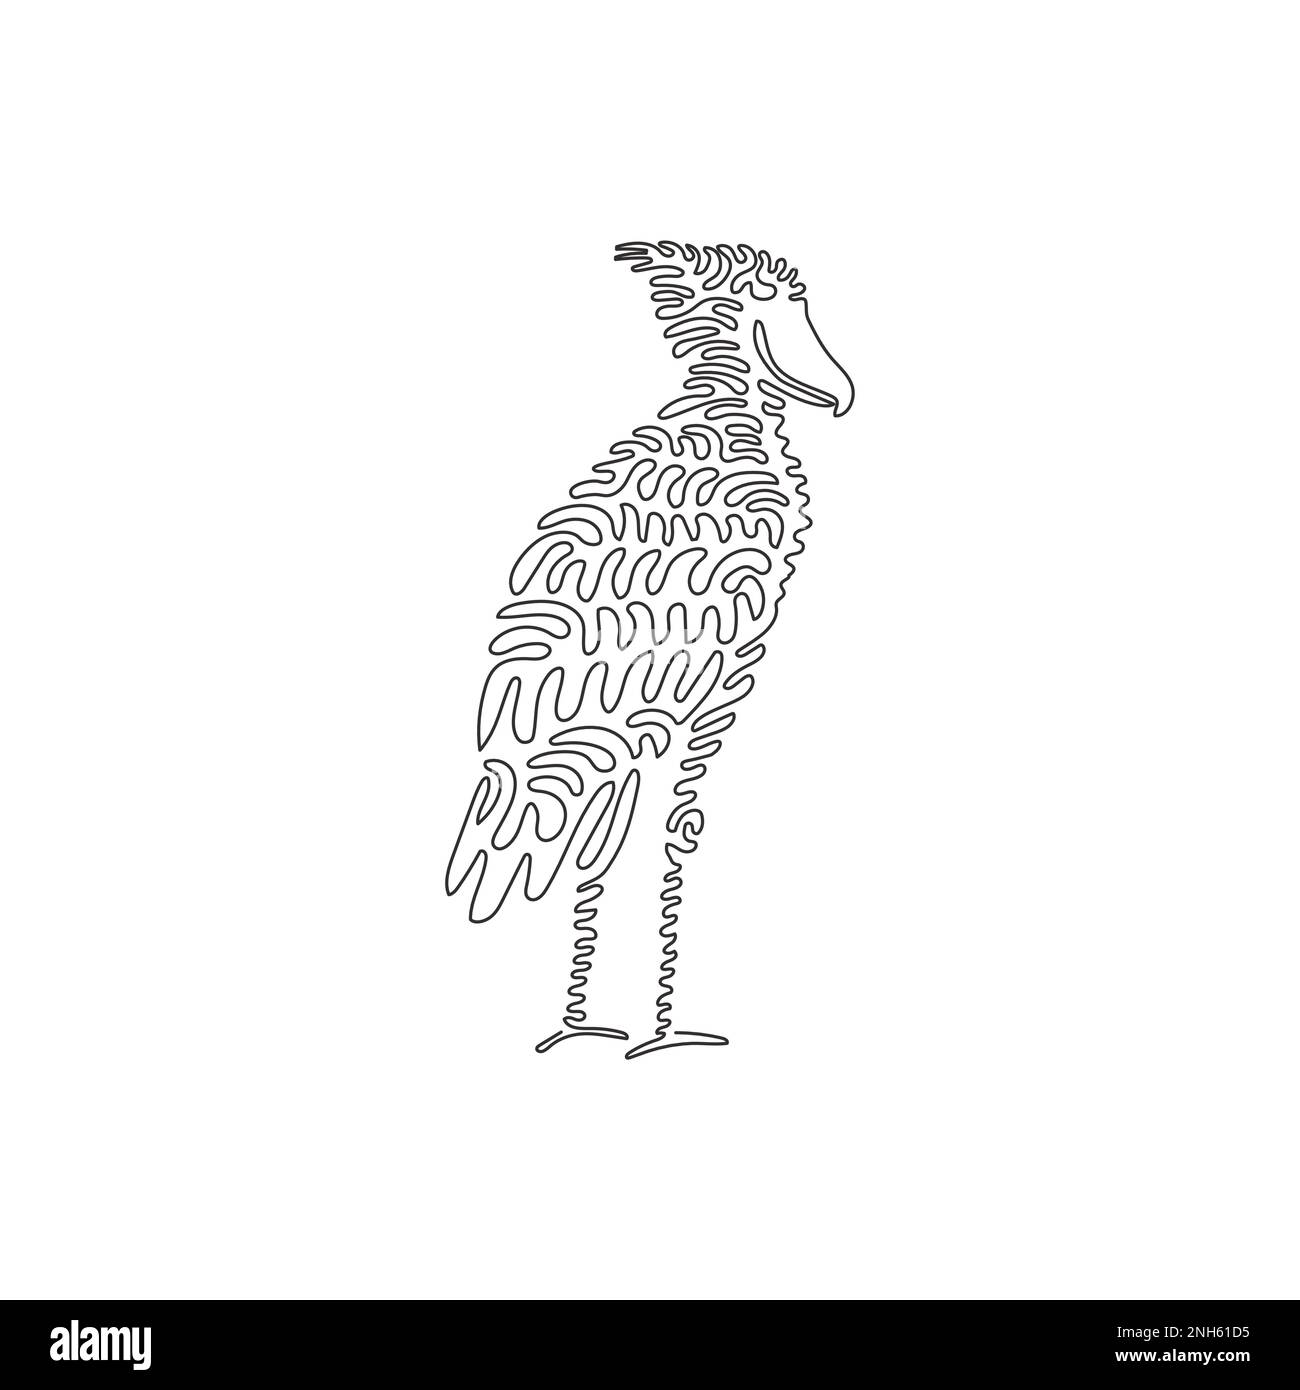 Single one curly line drawing of adorable standing shoebill abstract art. Continuous line drawing design vector illustration of cute wading bird Stock Vector